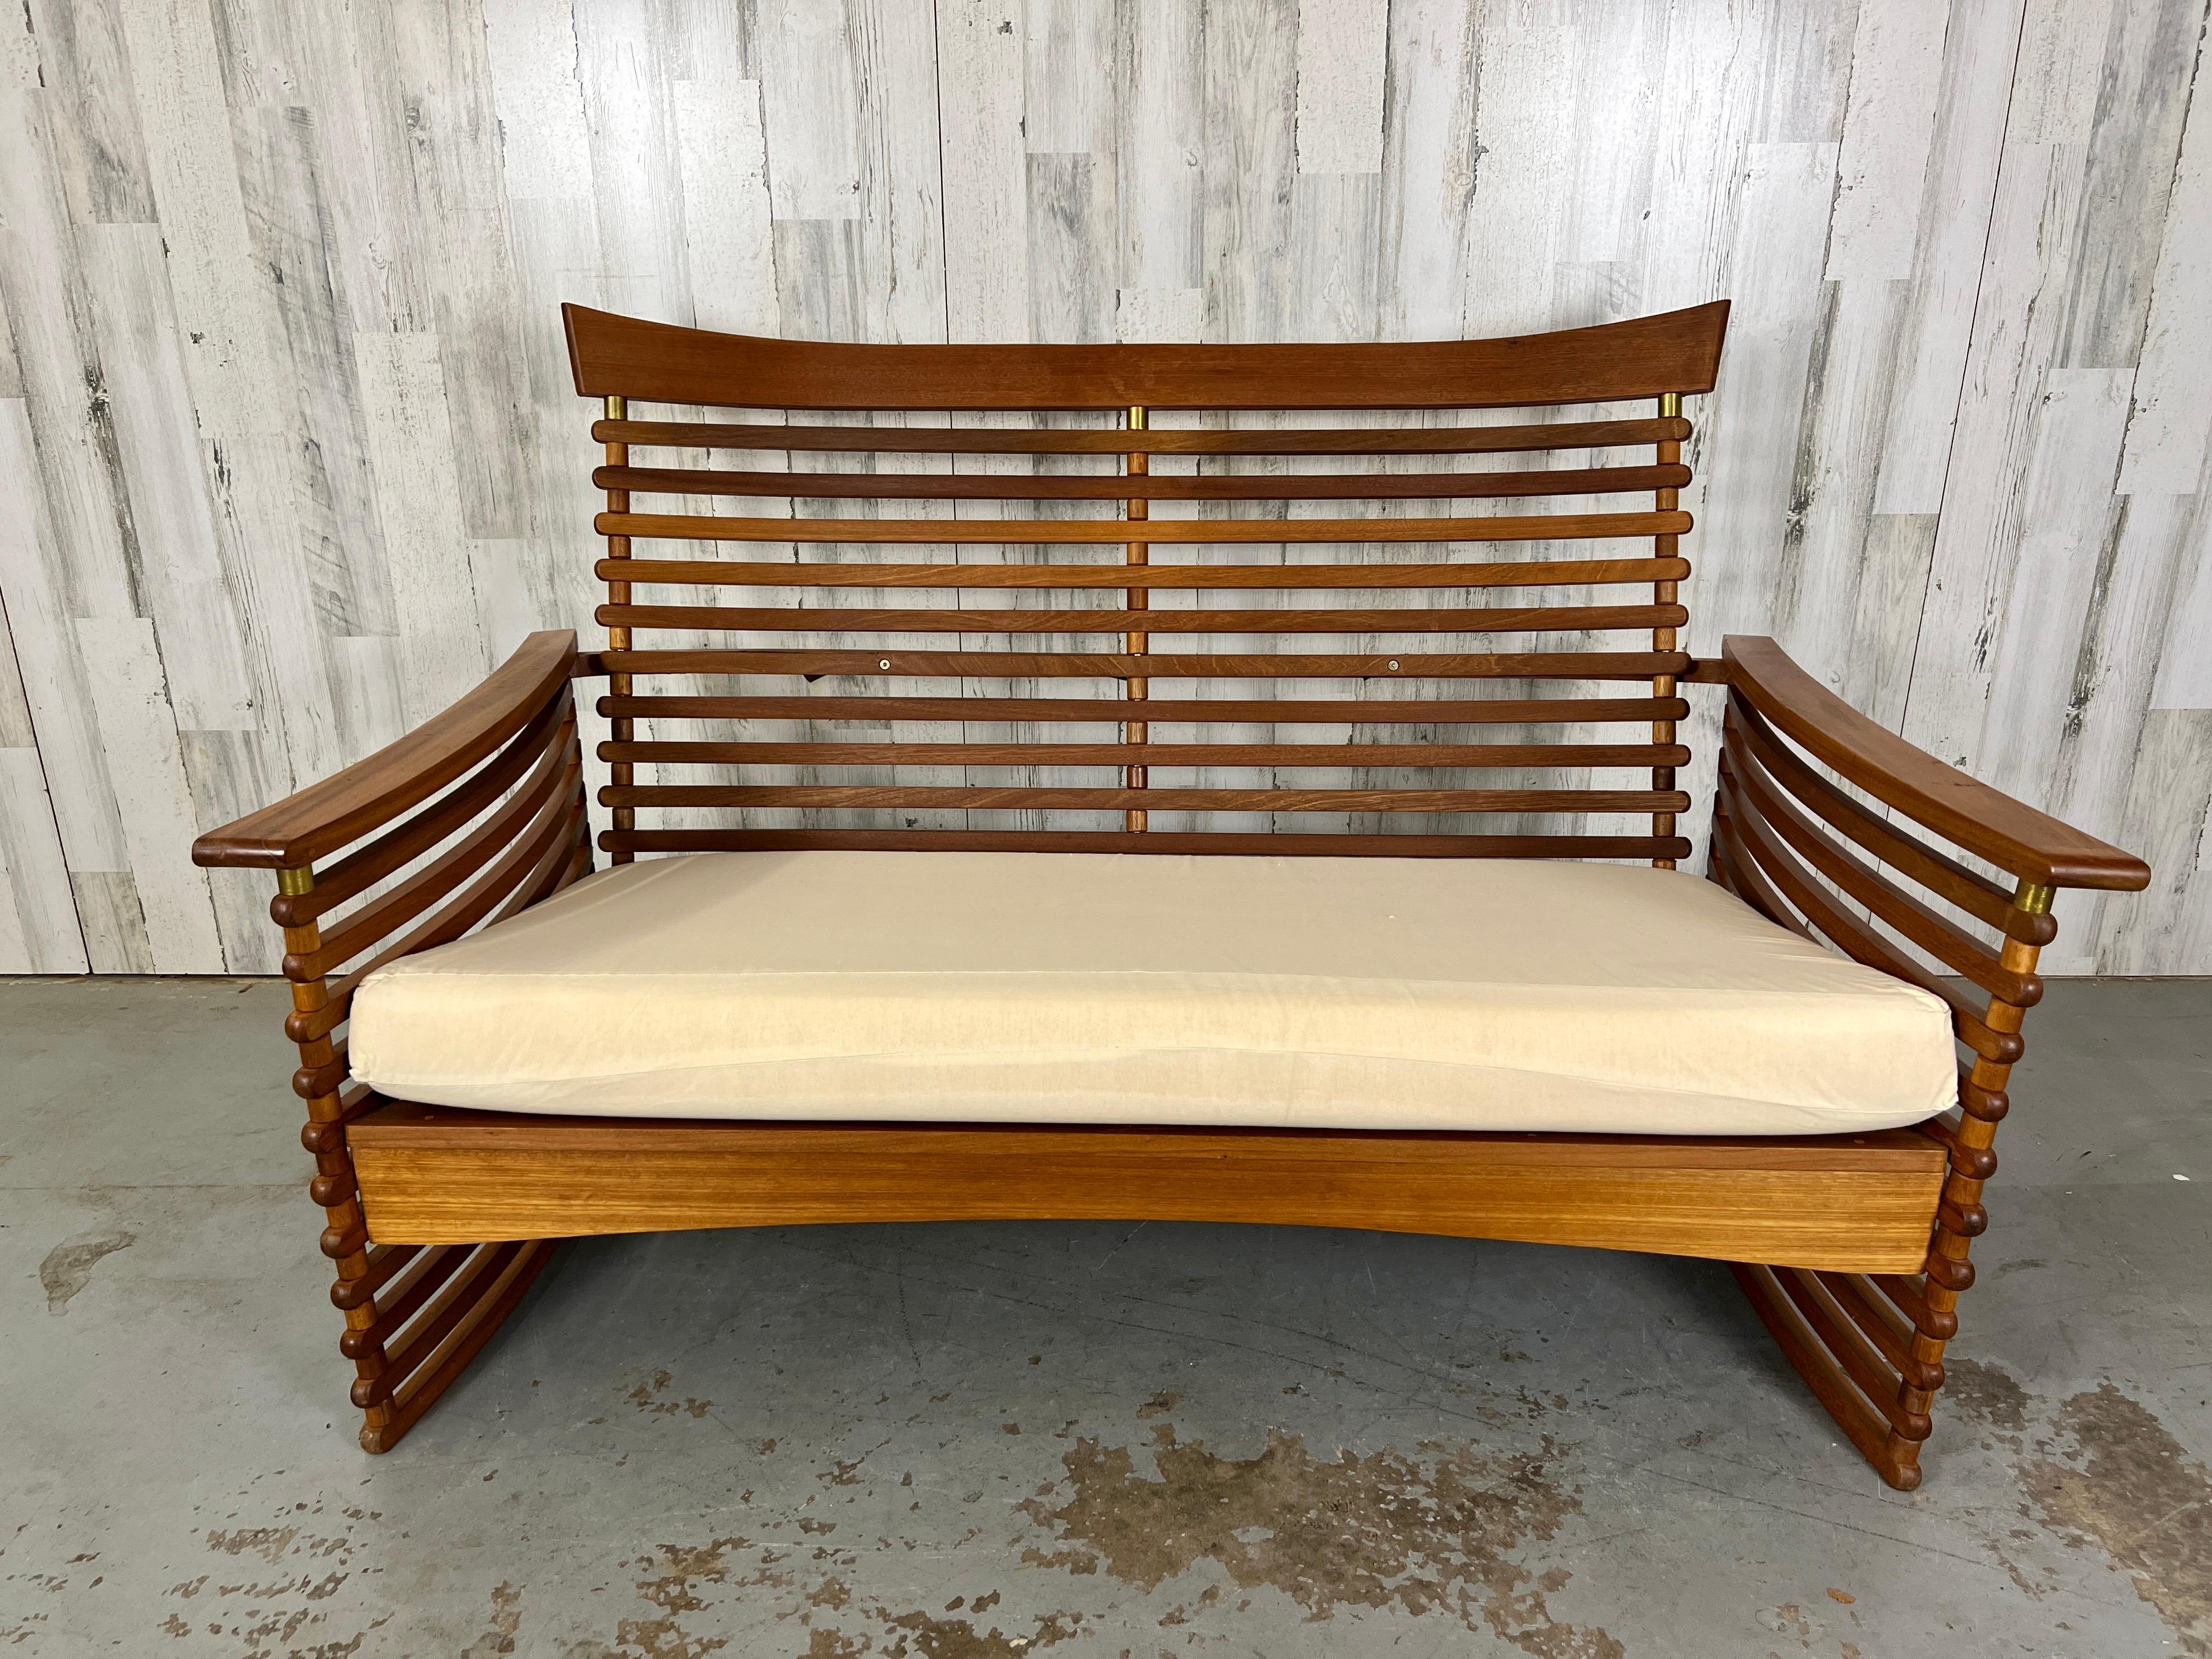 Solid Teak slats with brass accents. The sides are curved with a nice angle on the back. This settee is very sturdy and very comfortable for long term sitting. 
New upholstery is required.